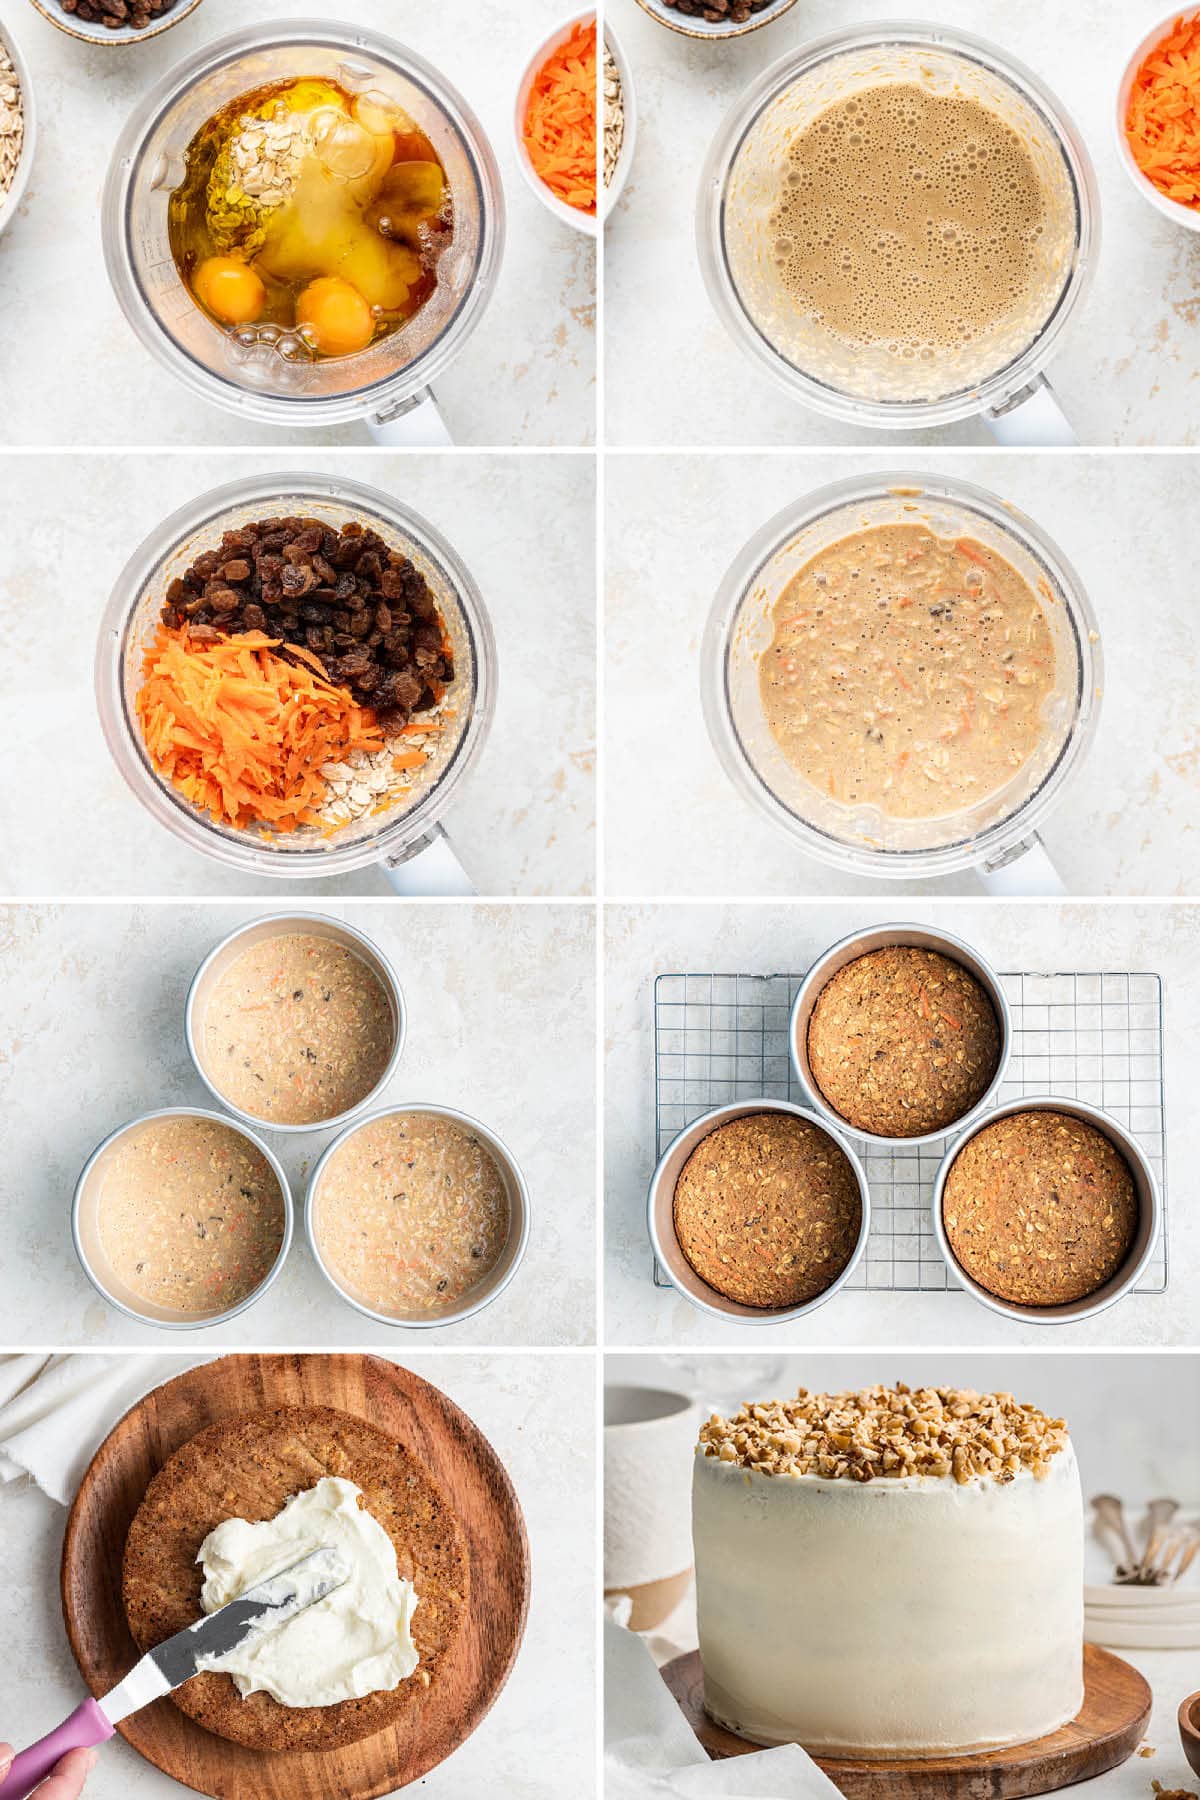 Collage of 8 photos showing the steps to make Oatmeal Carrot Cake: blending the batter in a blender, baking in three cake pans, and then layering the cake layers with cream cheese frosting.